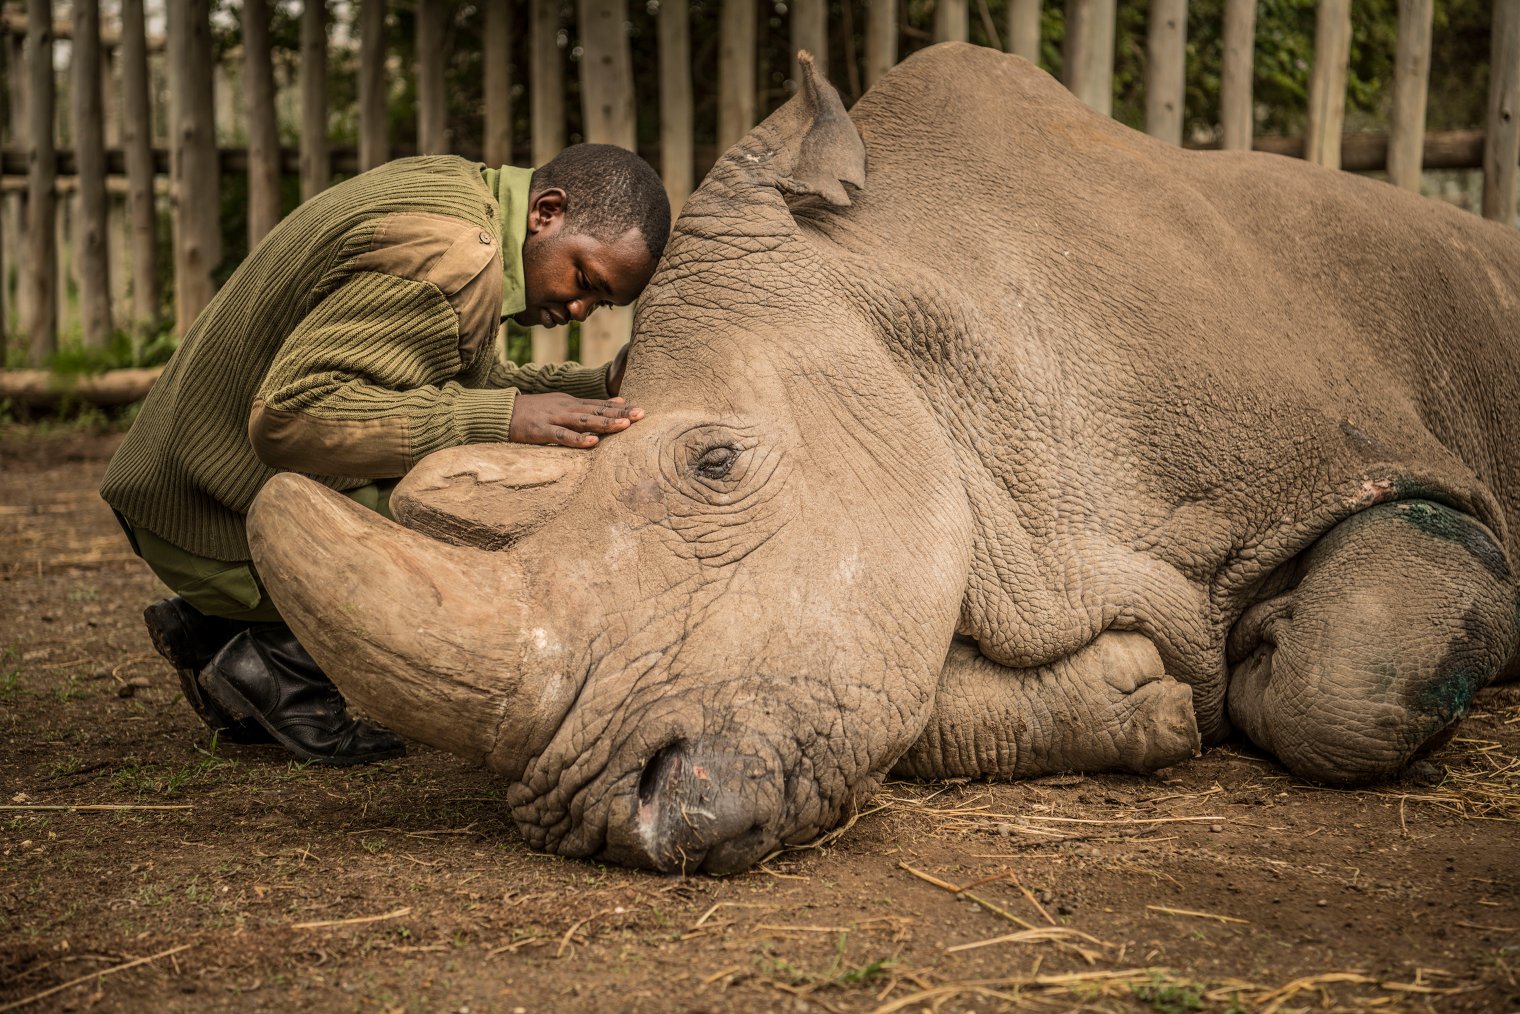 A Conversation with Ami Vitale About Rhino Conservation and How You Can Win a Trip to Kenya - Michael Bonocore